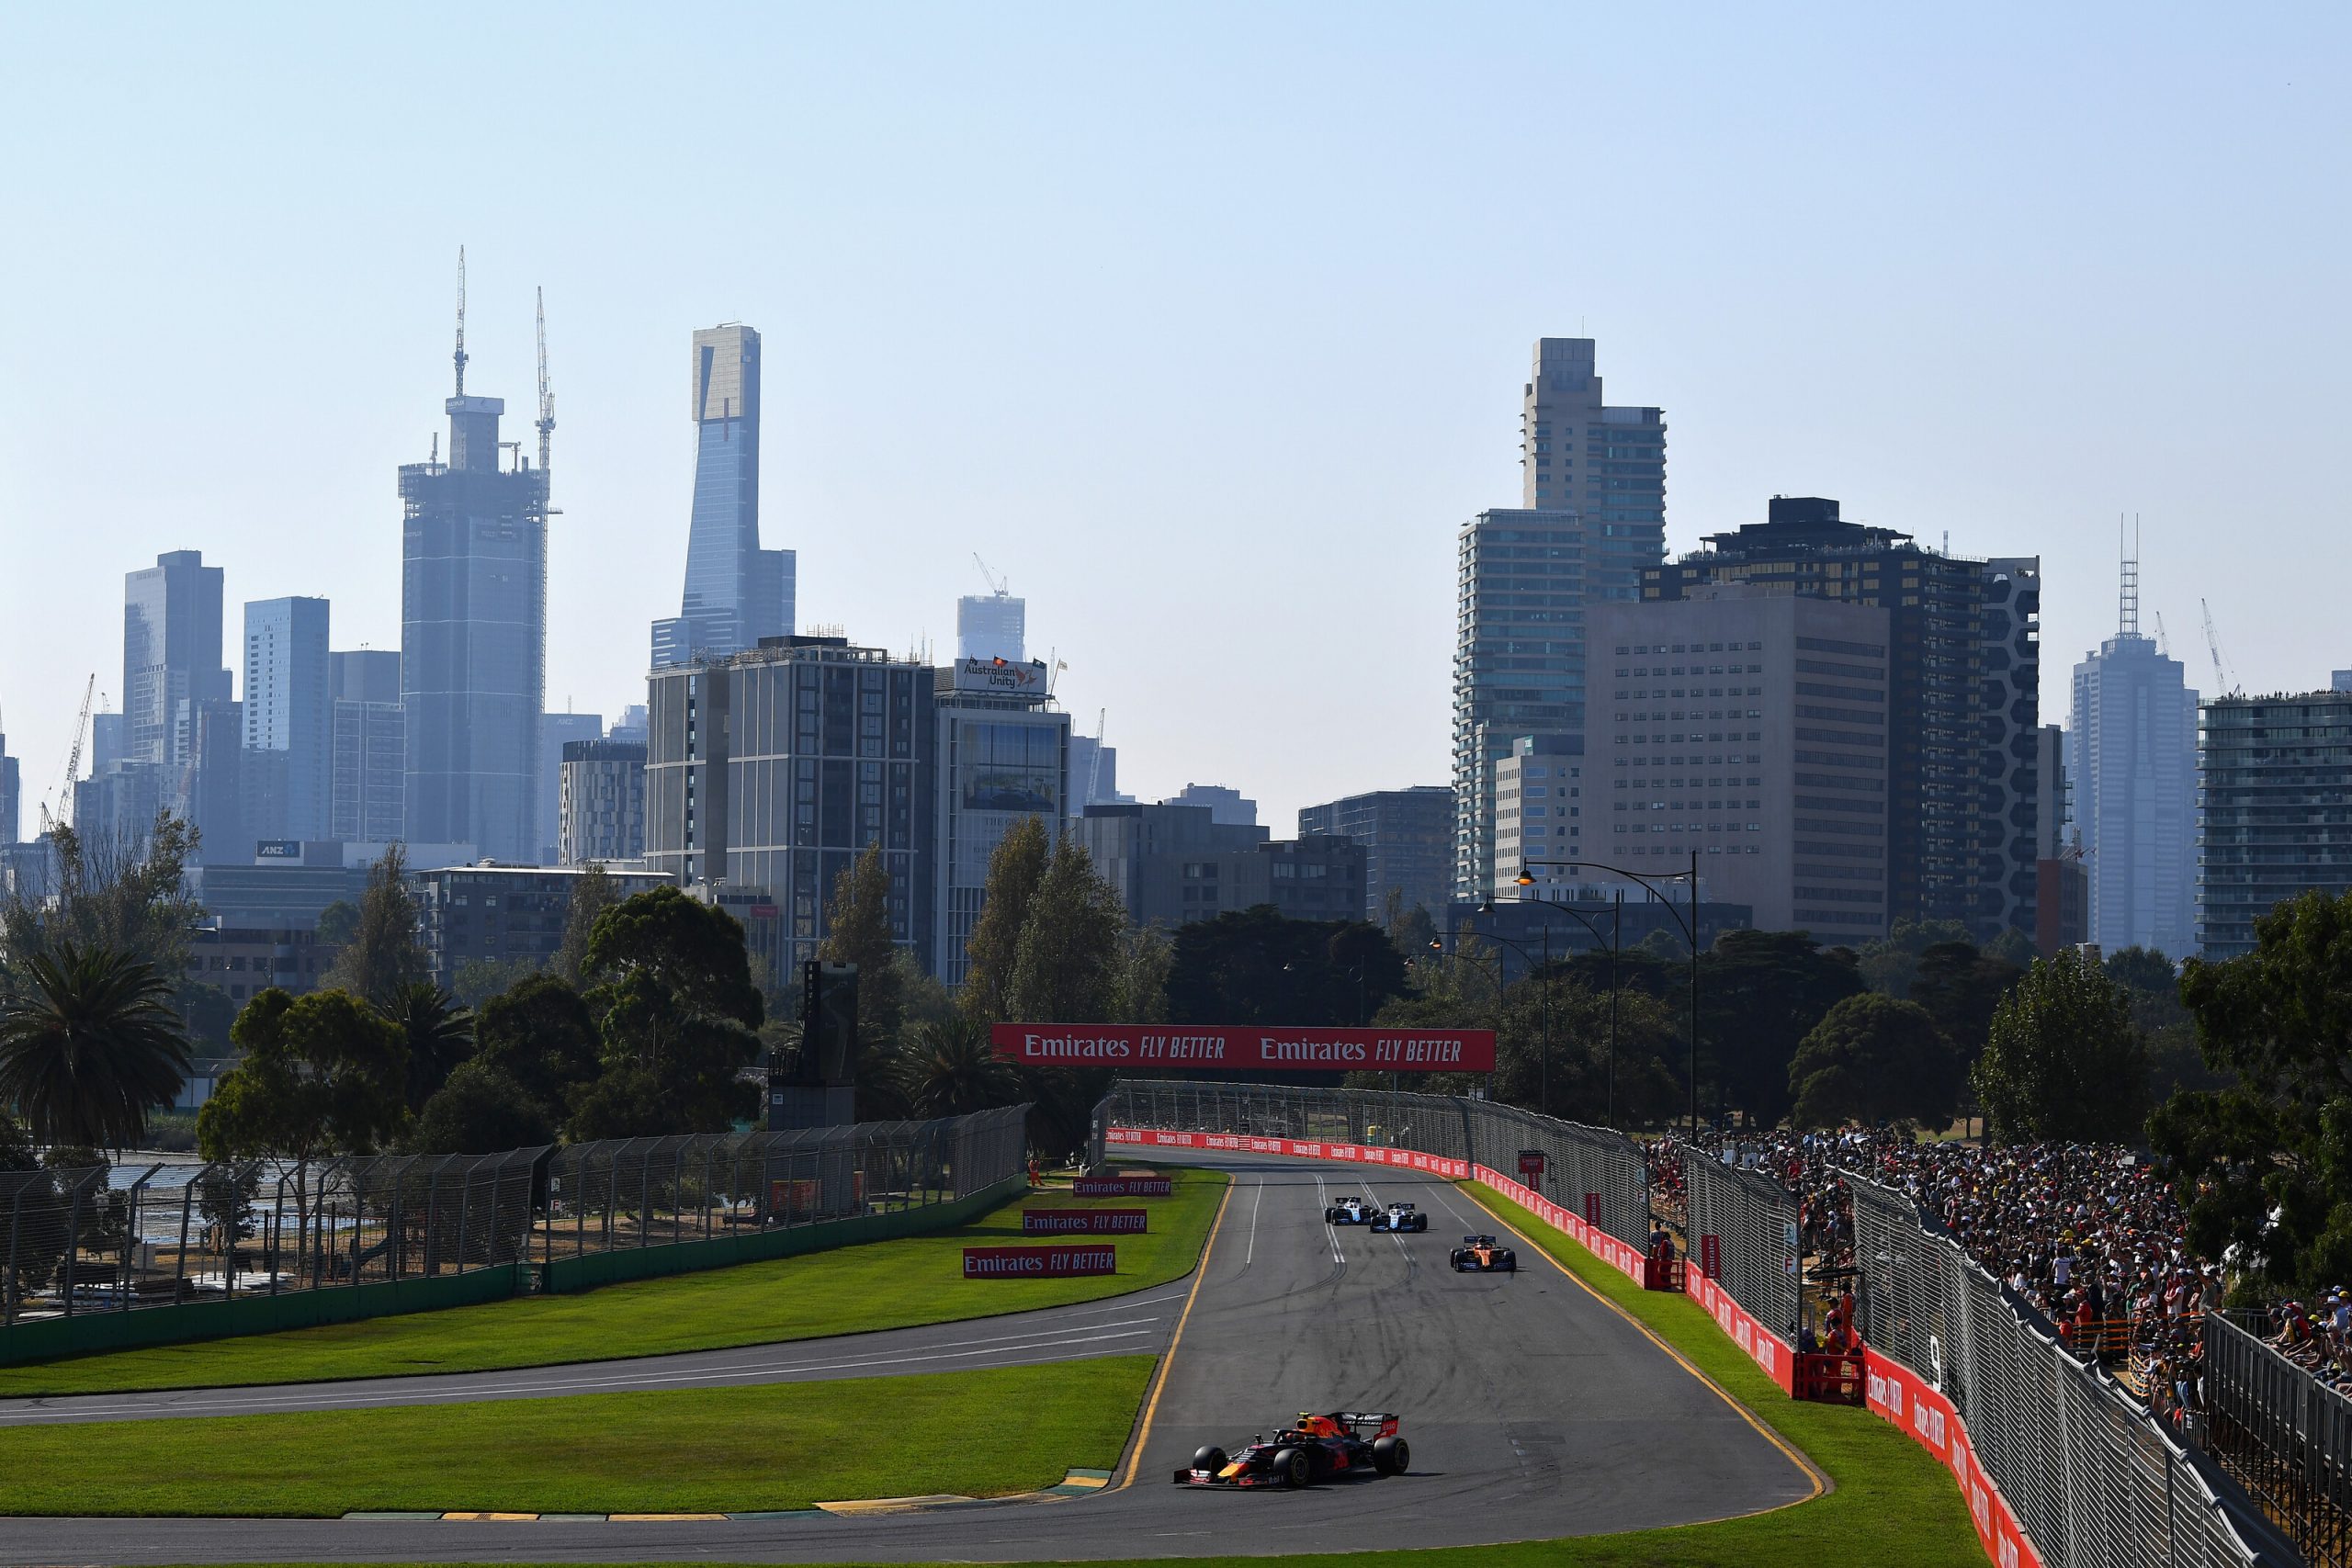 Melbourne will host the first round on the 2020 Formula 1 calendar